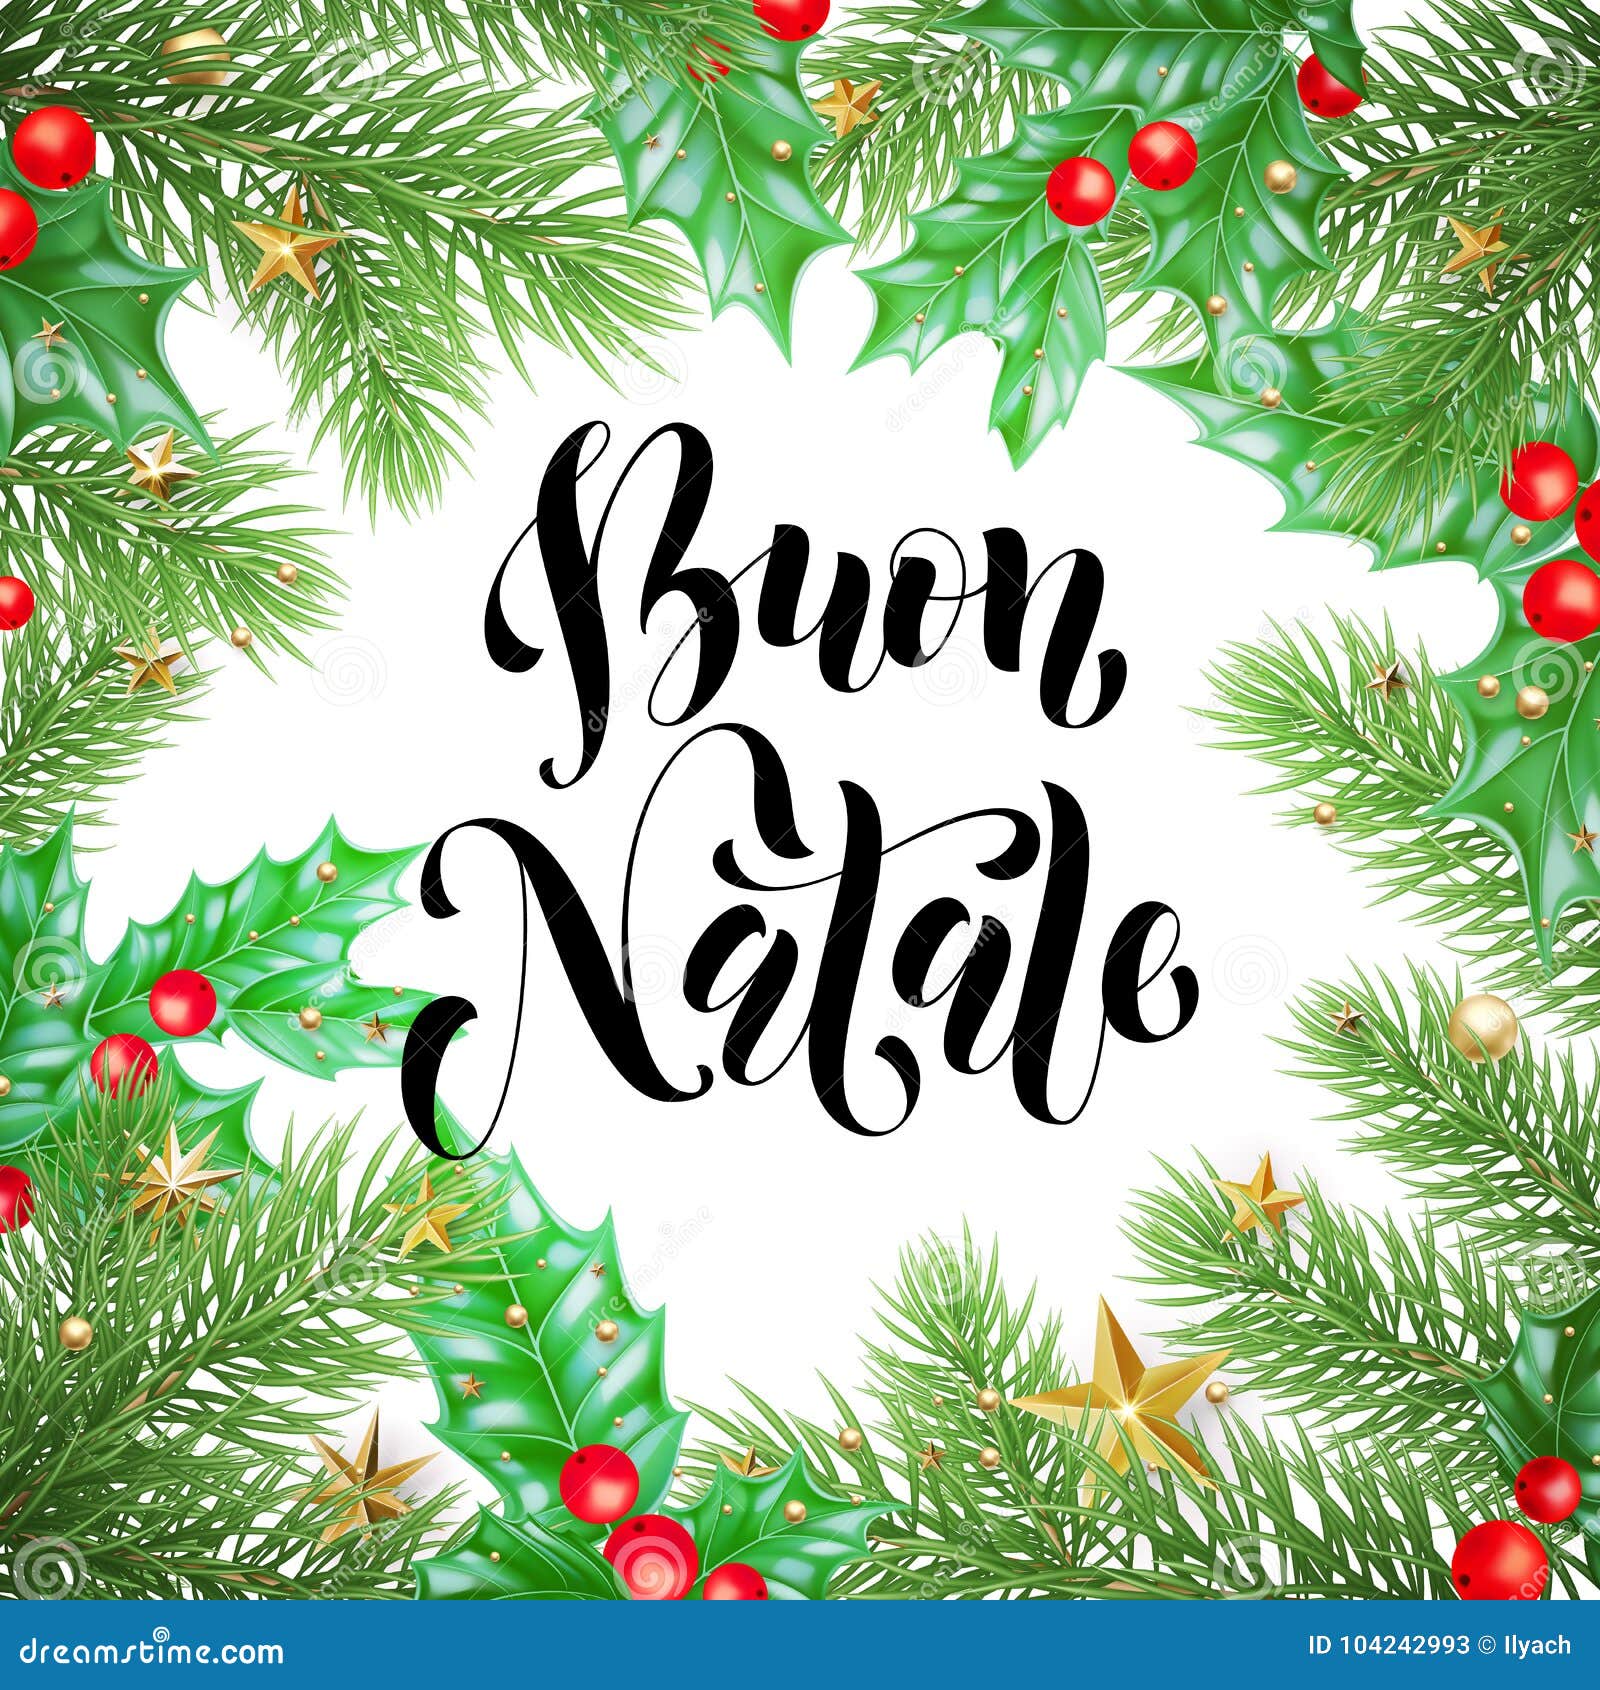 Buon Natale Wishes Italian.Buon Natale Italian Merry Christmas Holiday Hand Drawn Calligraphy Text For Greeting Card Of Wreath Decoration And Christmas Stars Stock Vector Illustration Of Holiday Decoration 104242993